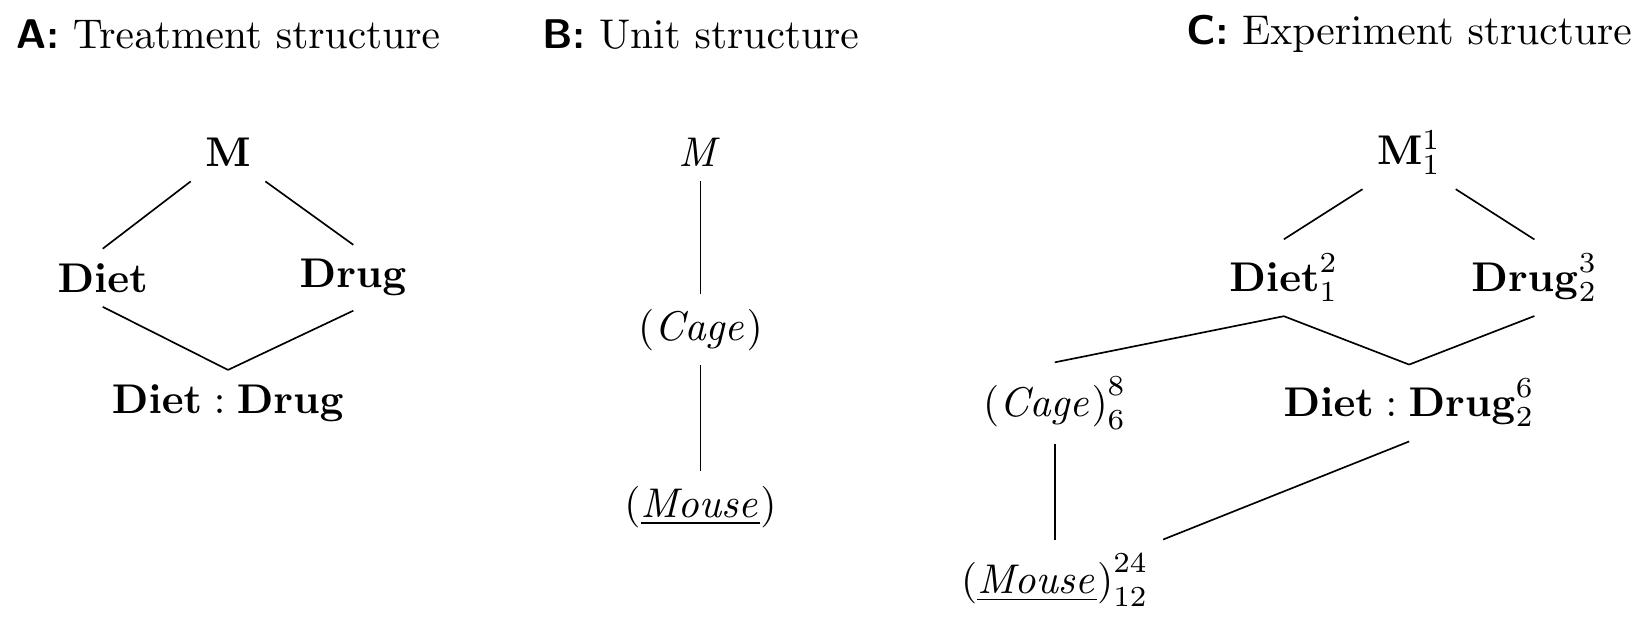 Split-unit design with diets randomized on cages and drugs randomized on mice within cages. Cages are blocks for the drug treatment, but experimental units for the diet treatment.